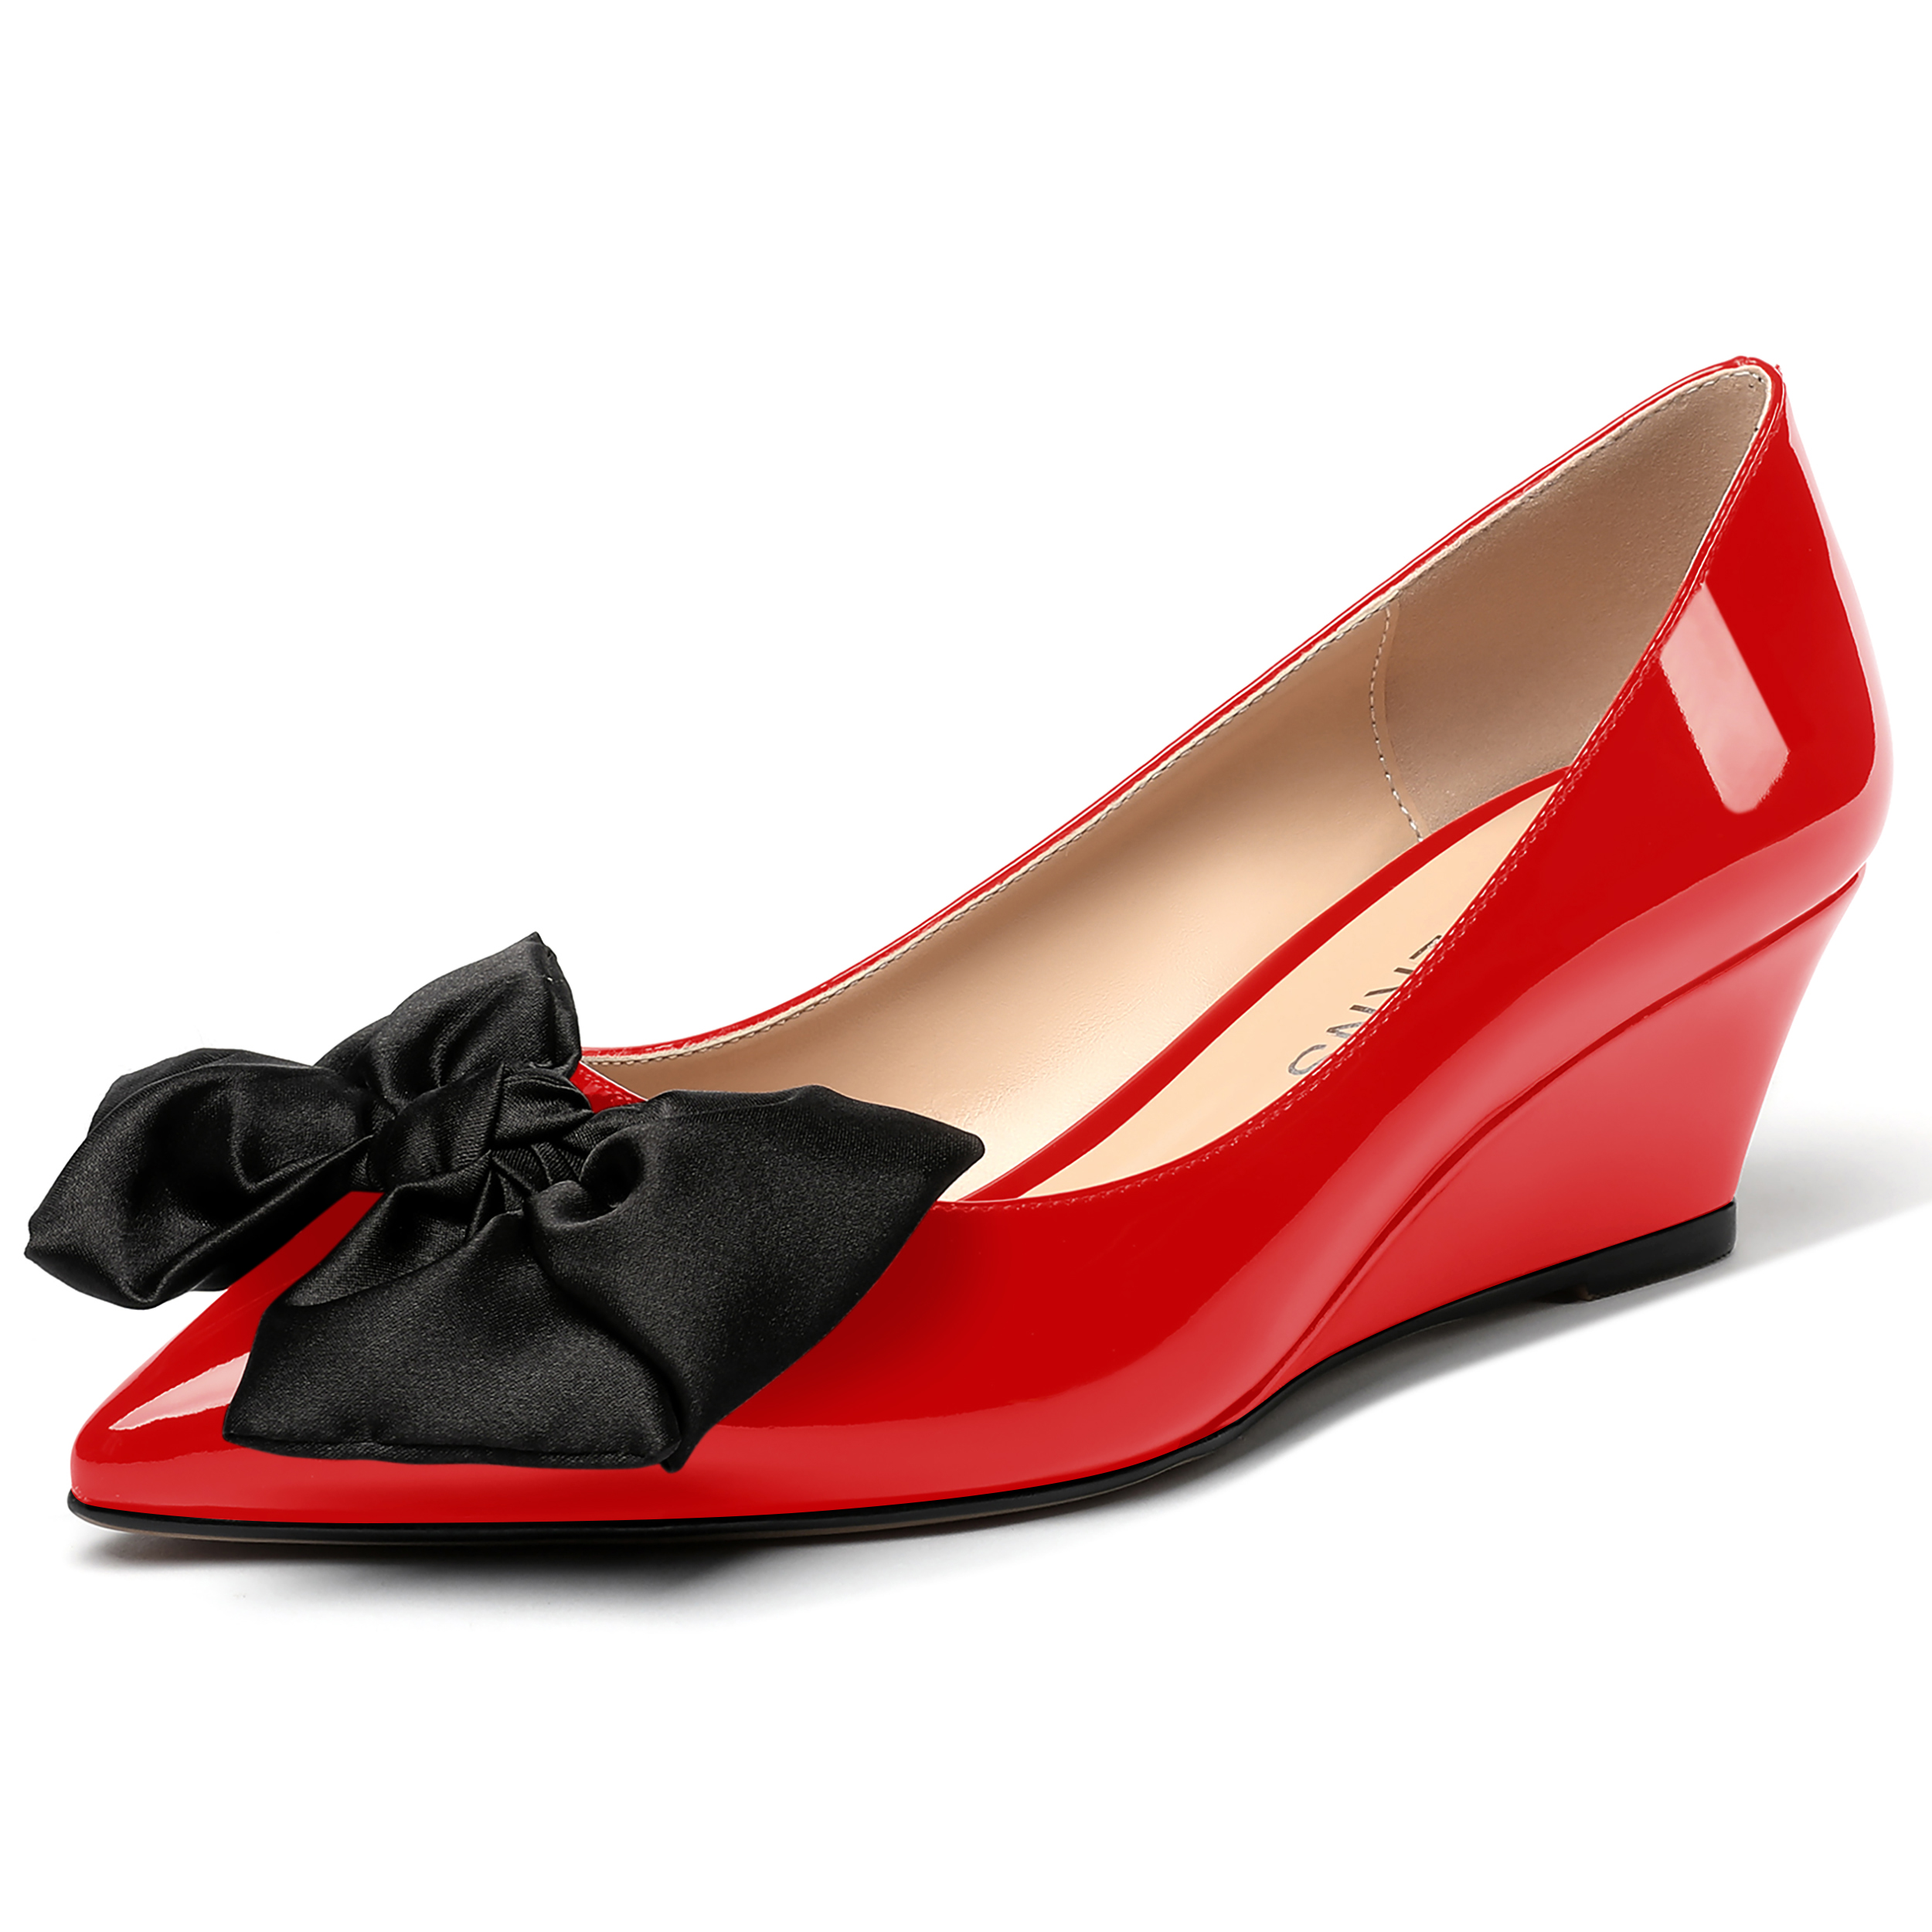 Anna Pointed Toe Slip On Wedge Pumps with Bow Accessory